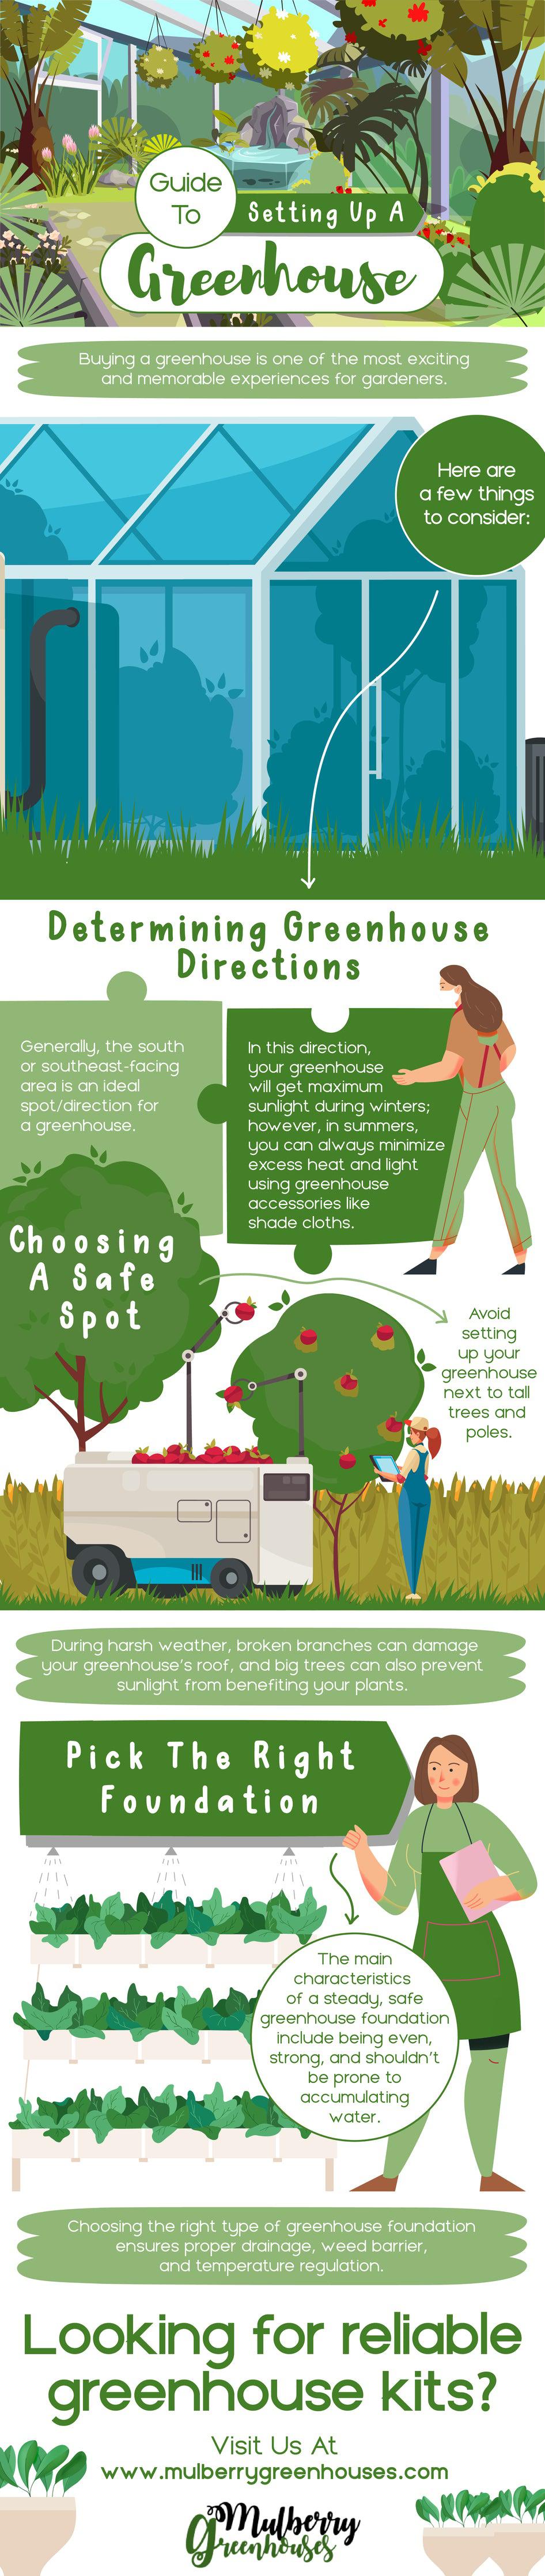 Guide To Setting Up A Greenhouse - Infograph